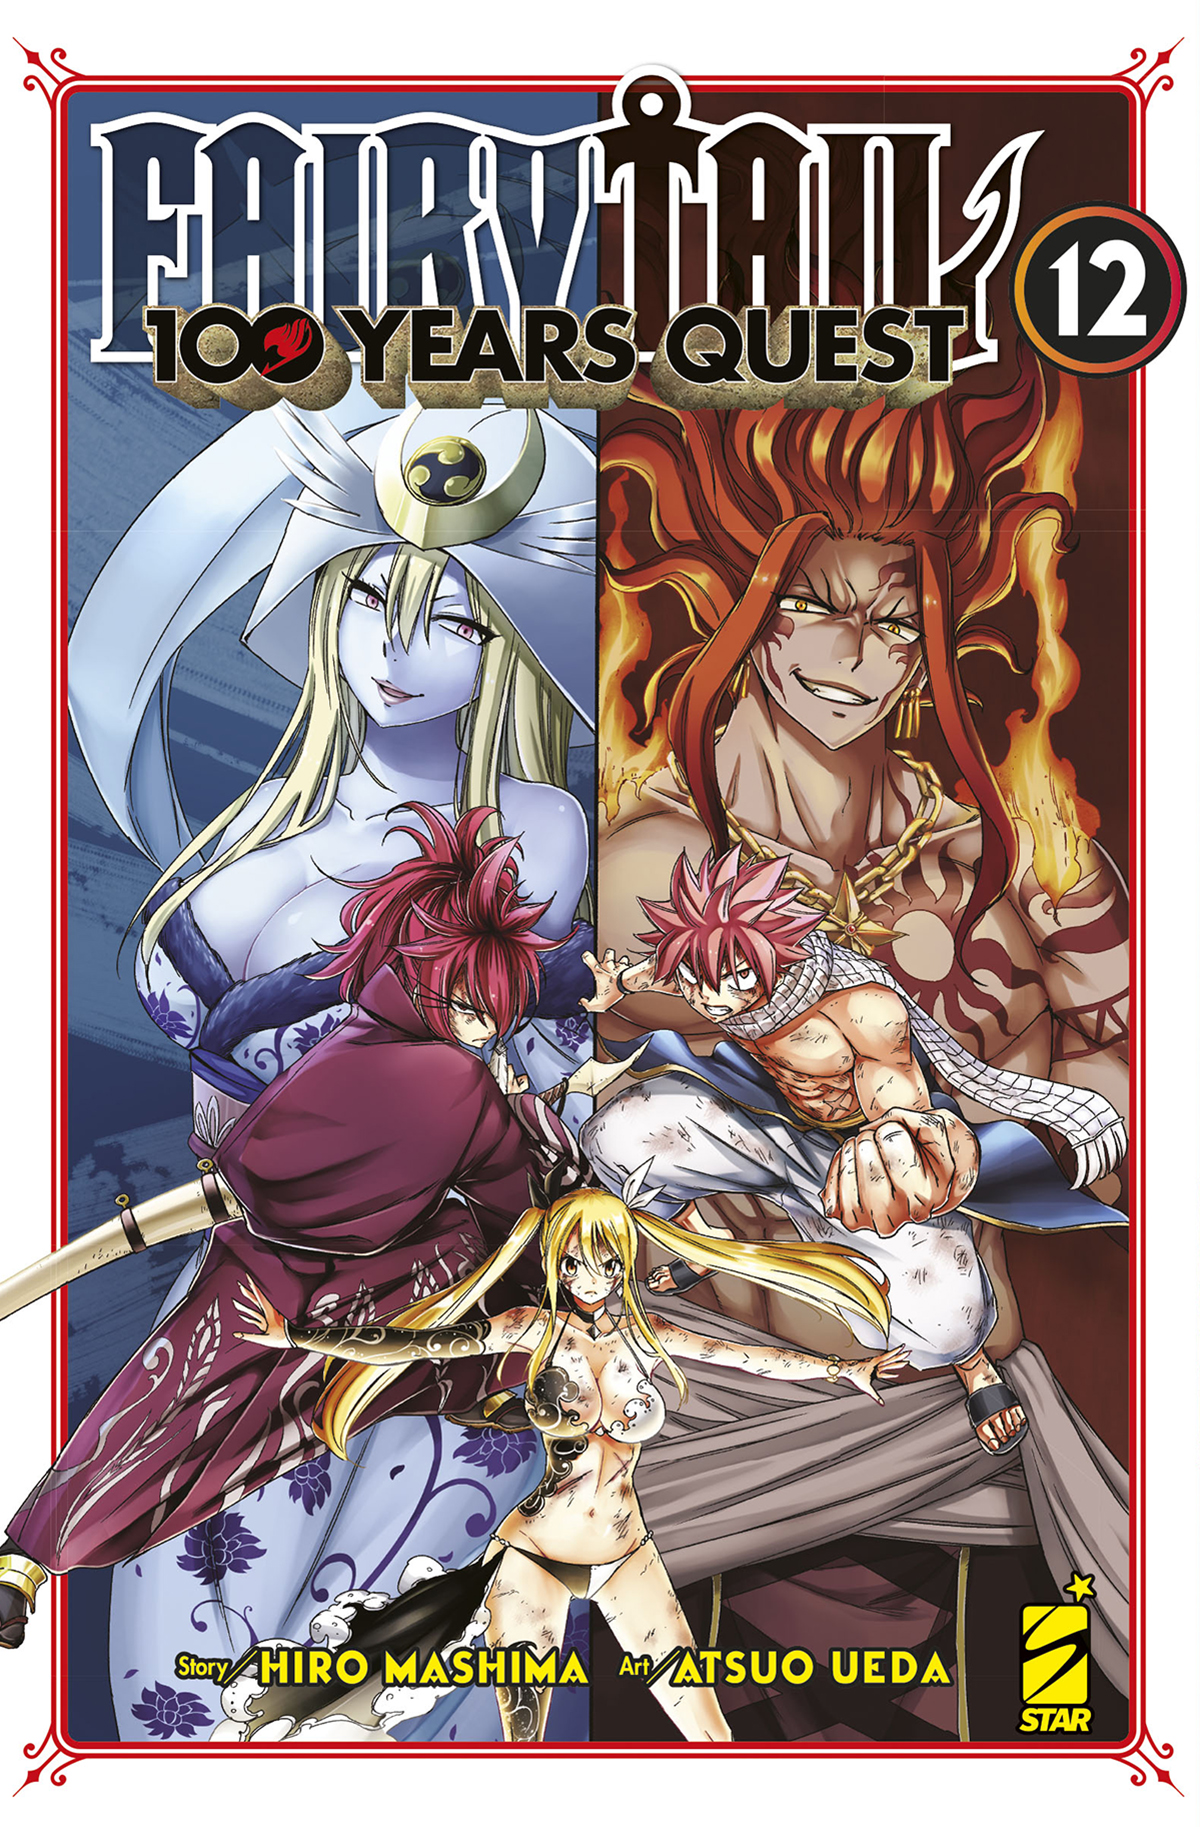 YOUNG #342 FAIRY TAIL 100 YEARS QUEST N.12